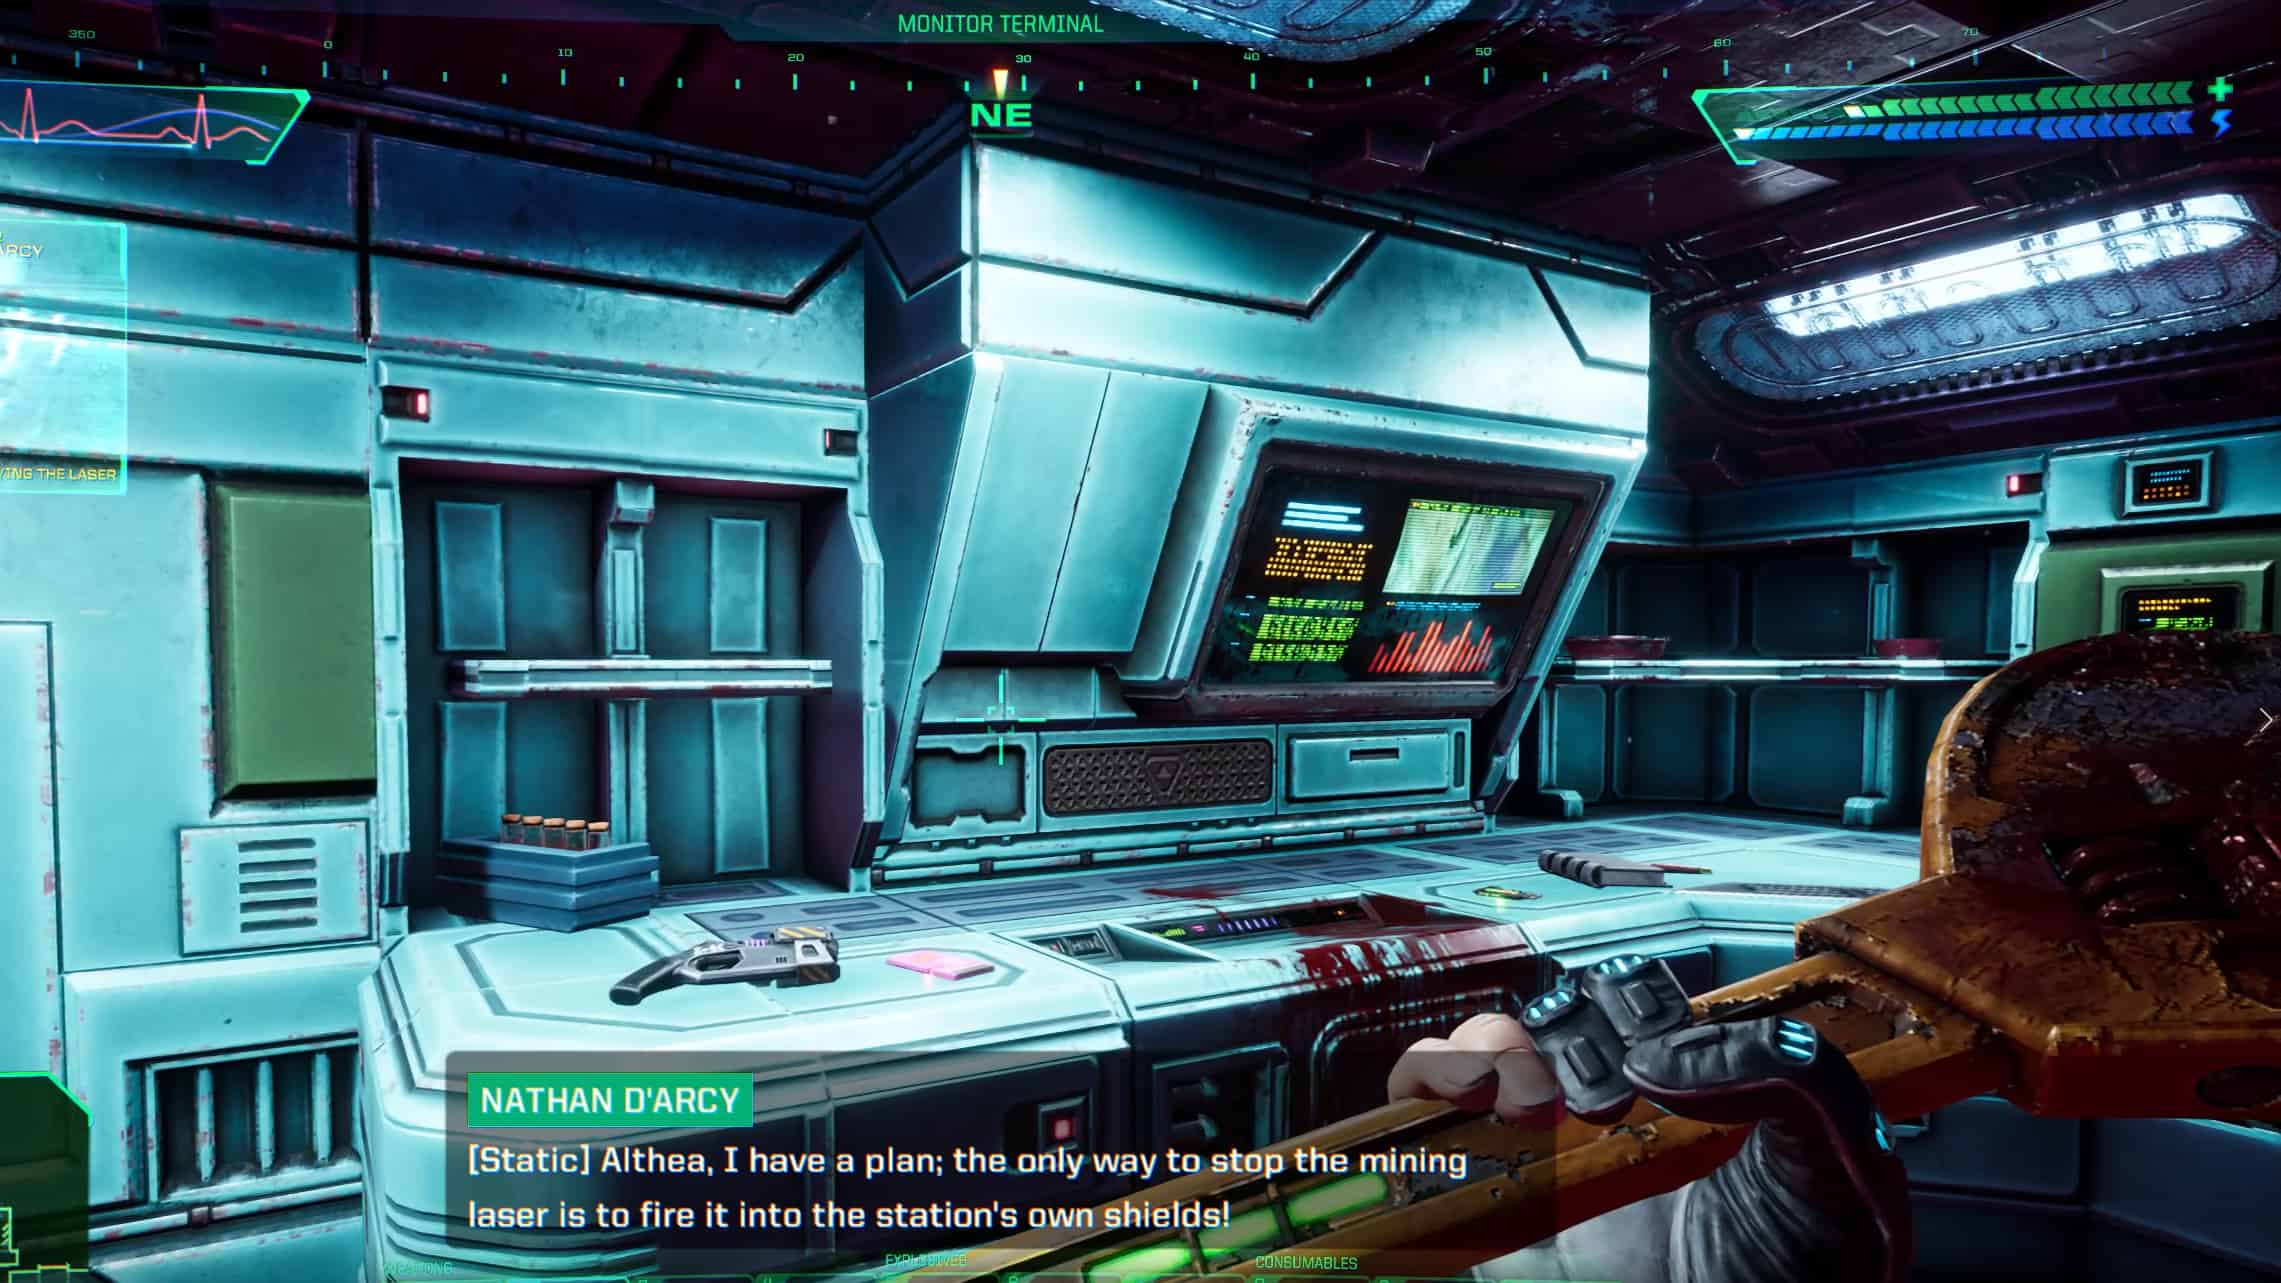 How to get guns early in System Shock: A room with a Sparobeam energy gun sitting on a blood-stained desk.